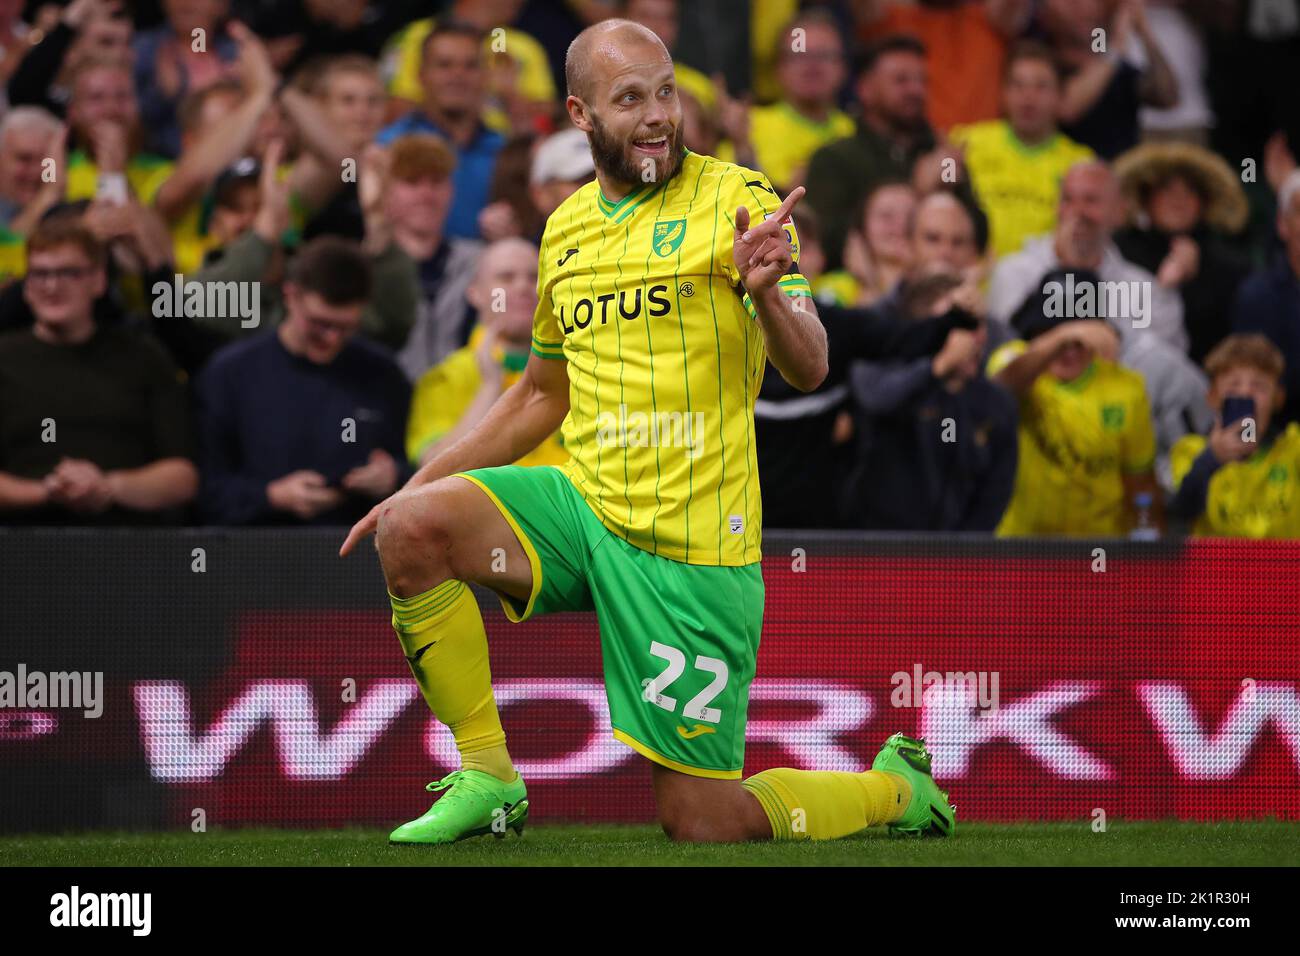 Teemu Pukki of Norwich City celebrates after scoring a goal to make it 1-0 - Norwich City v Bristol City, Sky Bet Championship, Carrow Road, Norwich, UK - 14th September 2022  Editorial Use Only - DataCo restrictions apply Stock Photo